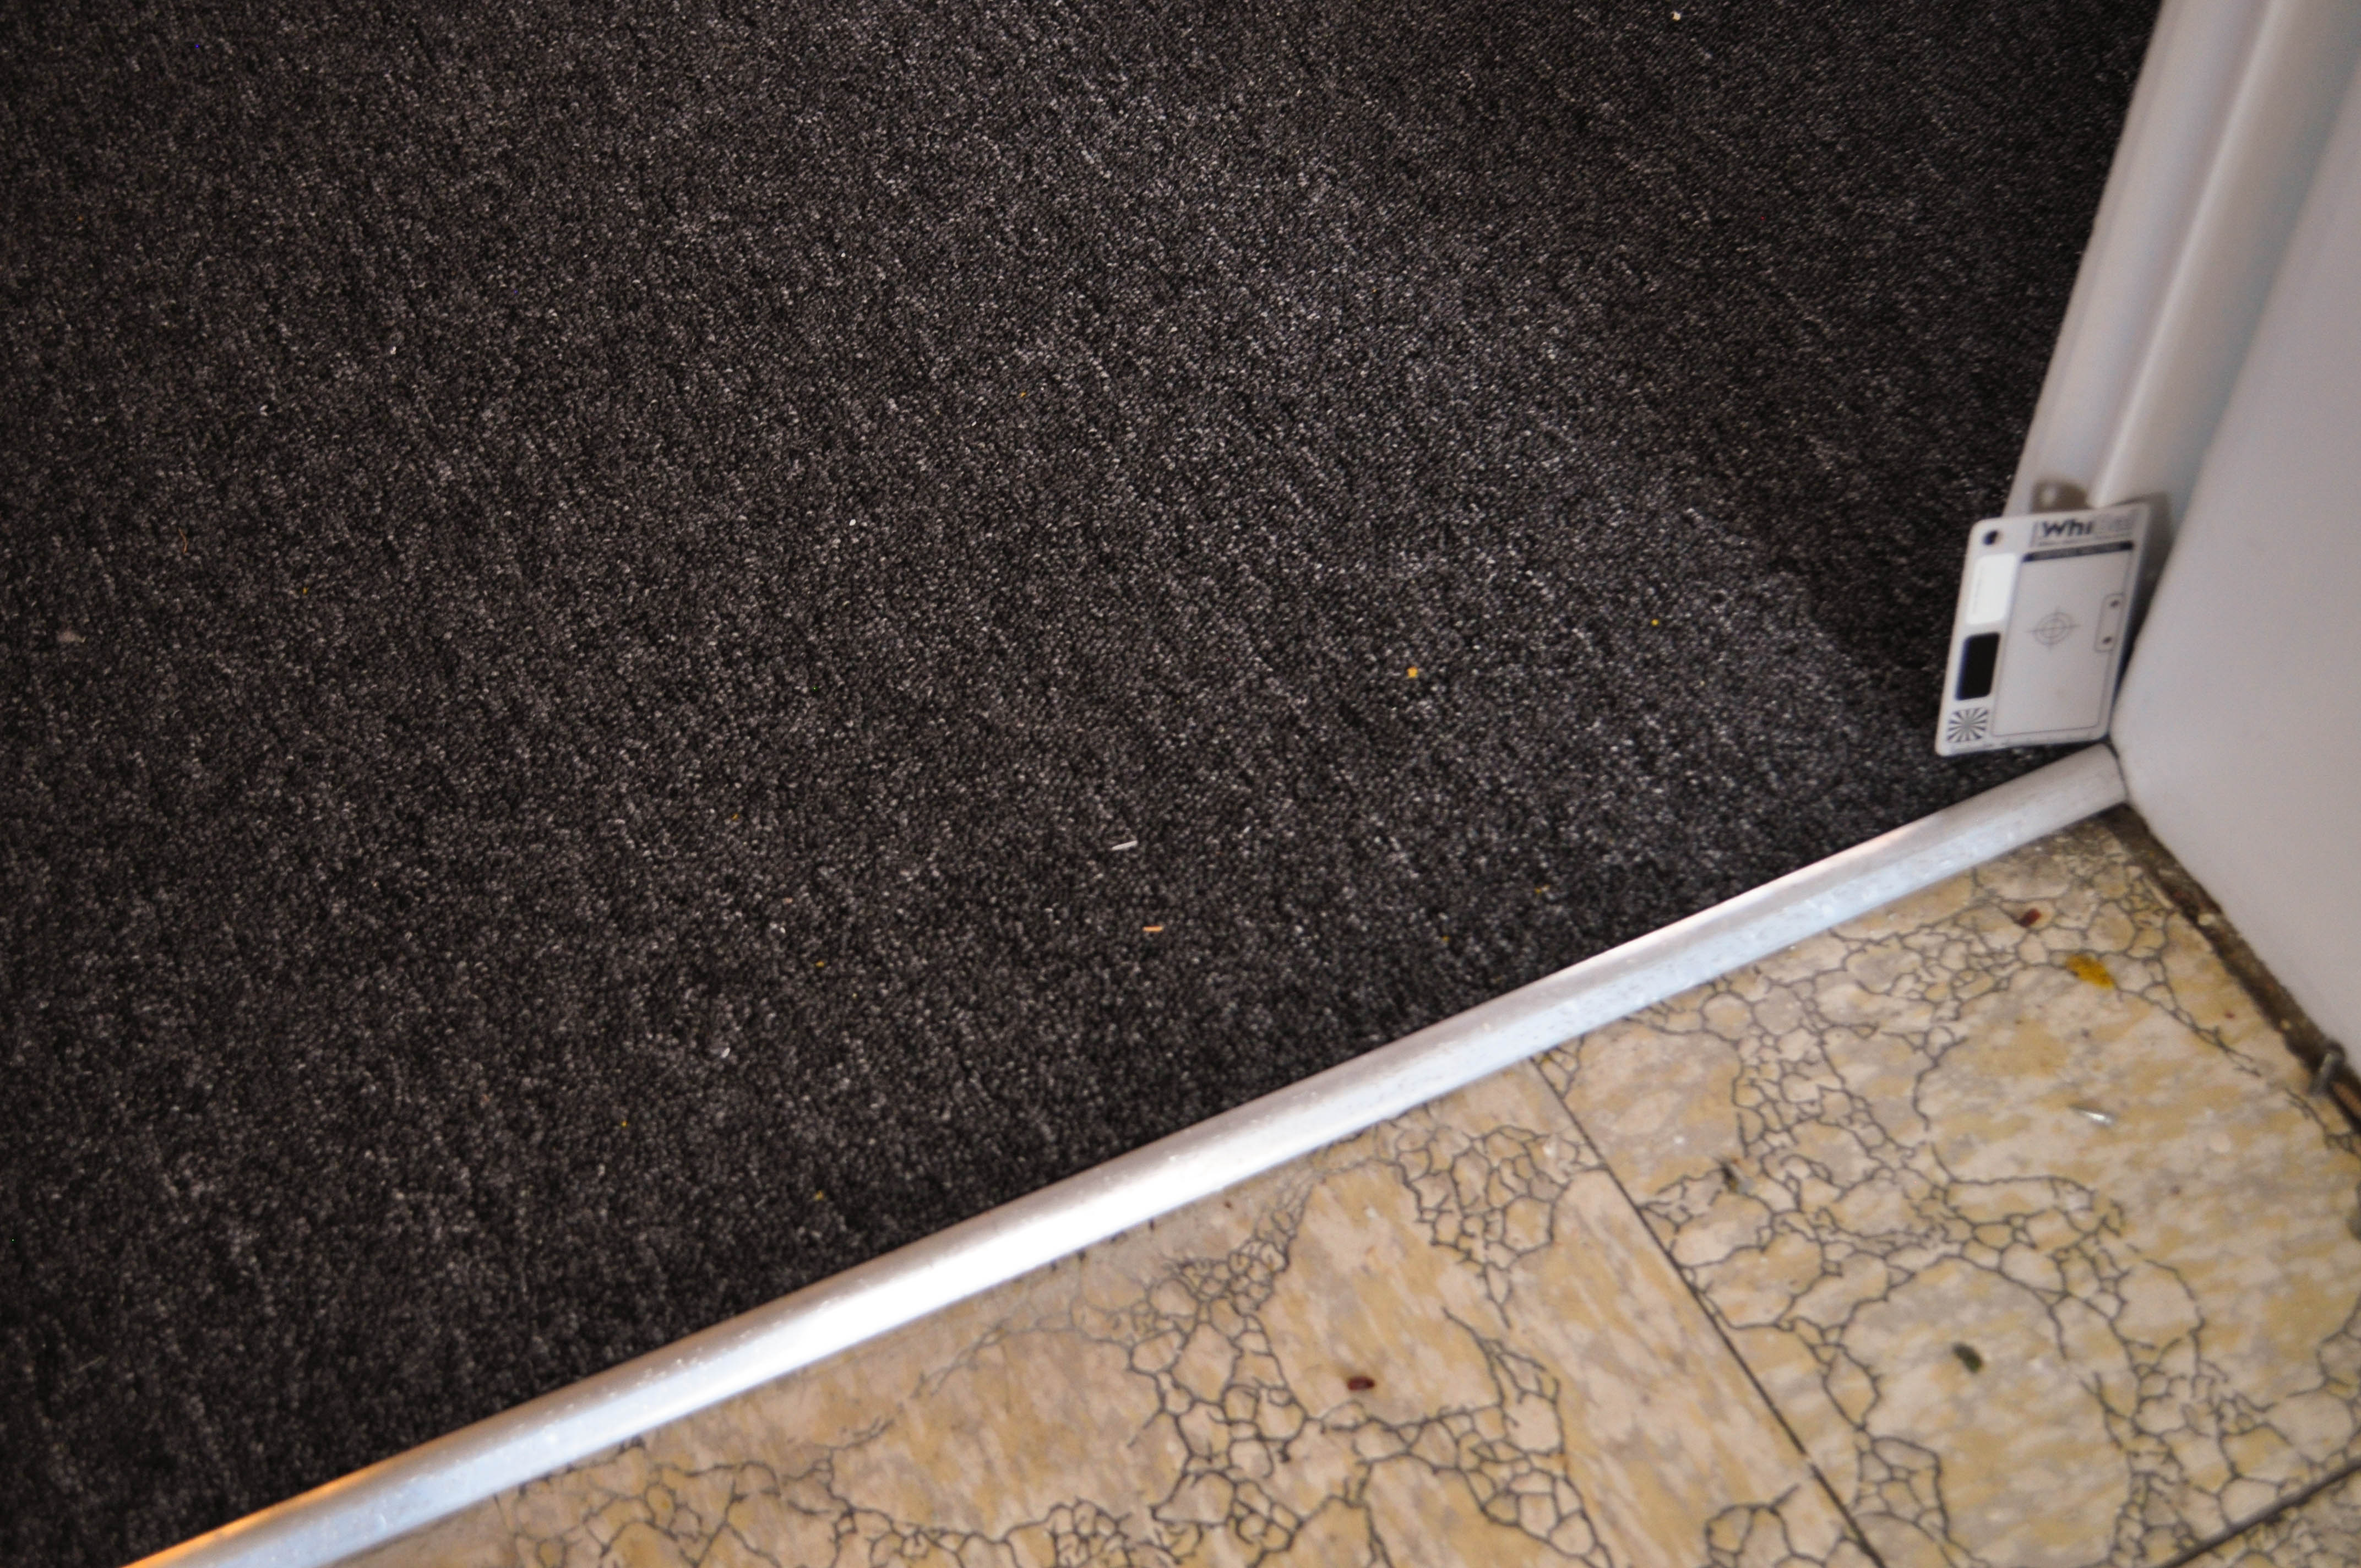 showing a black coloured carpet on a room's floor, it being a loop pile, polypropelene yarn carpet on sale at Concord Floors.